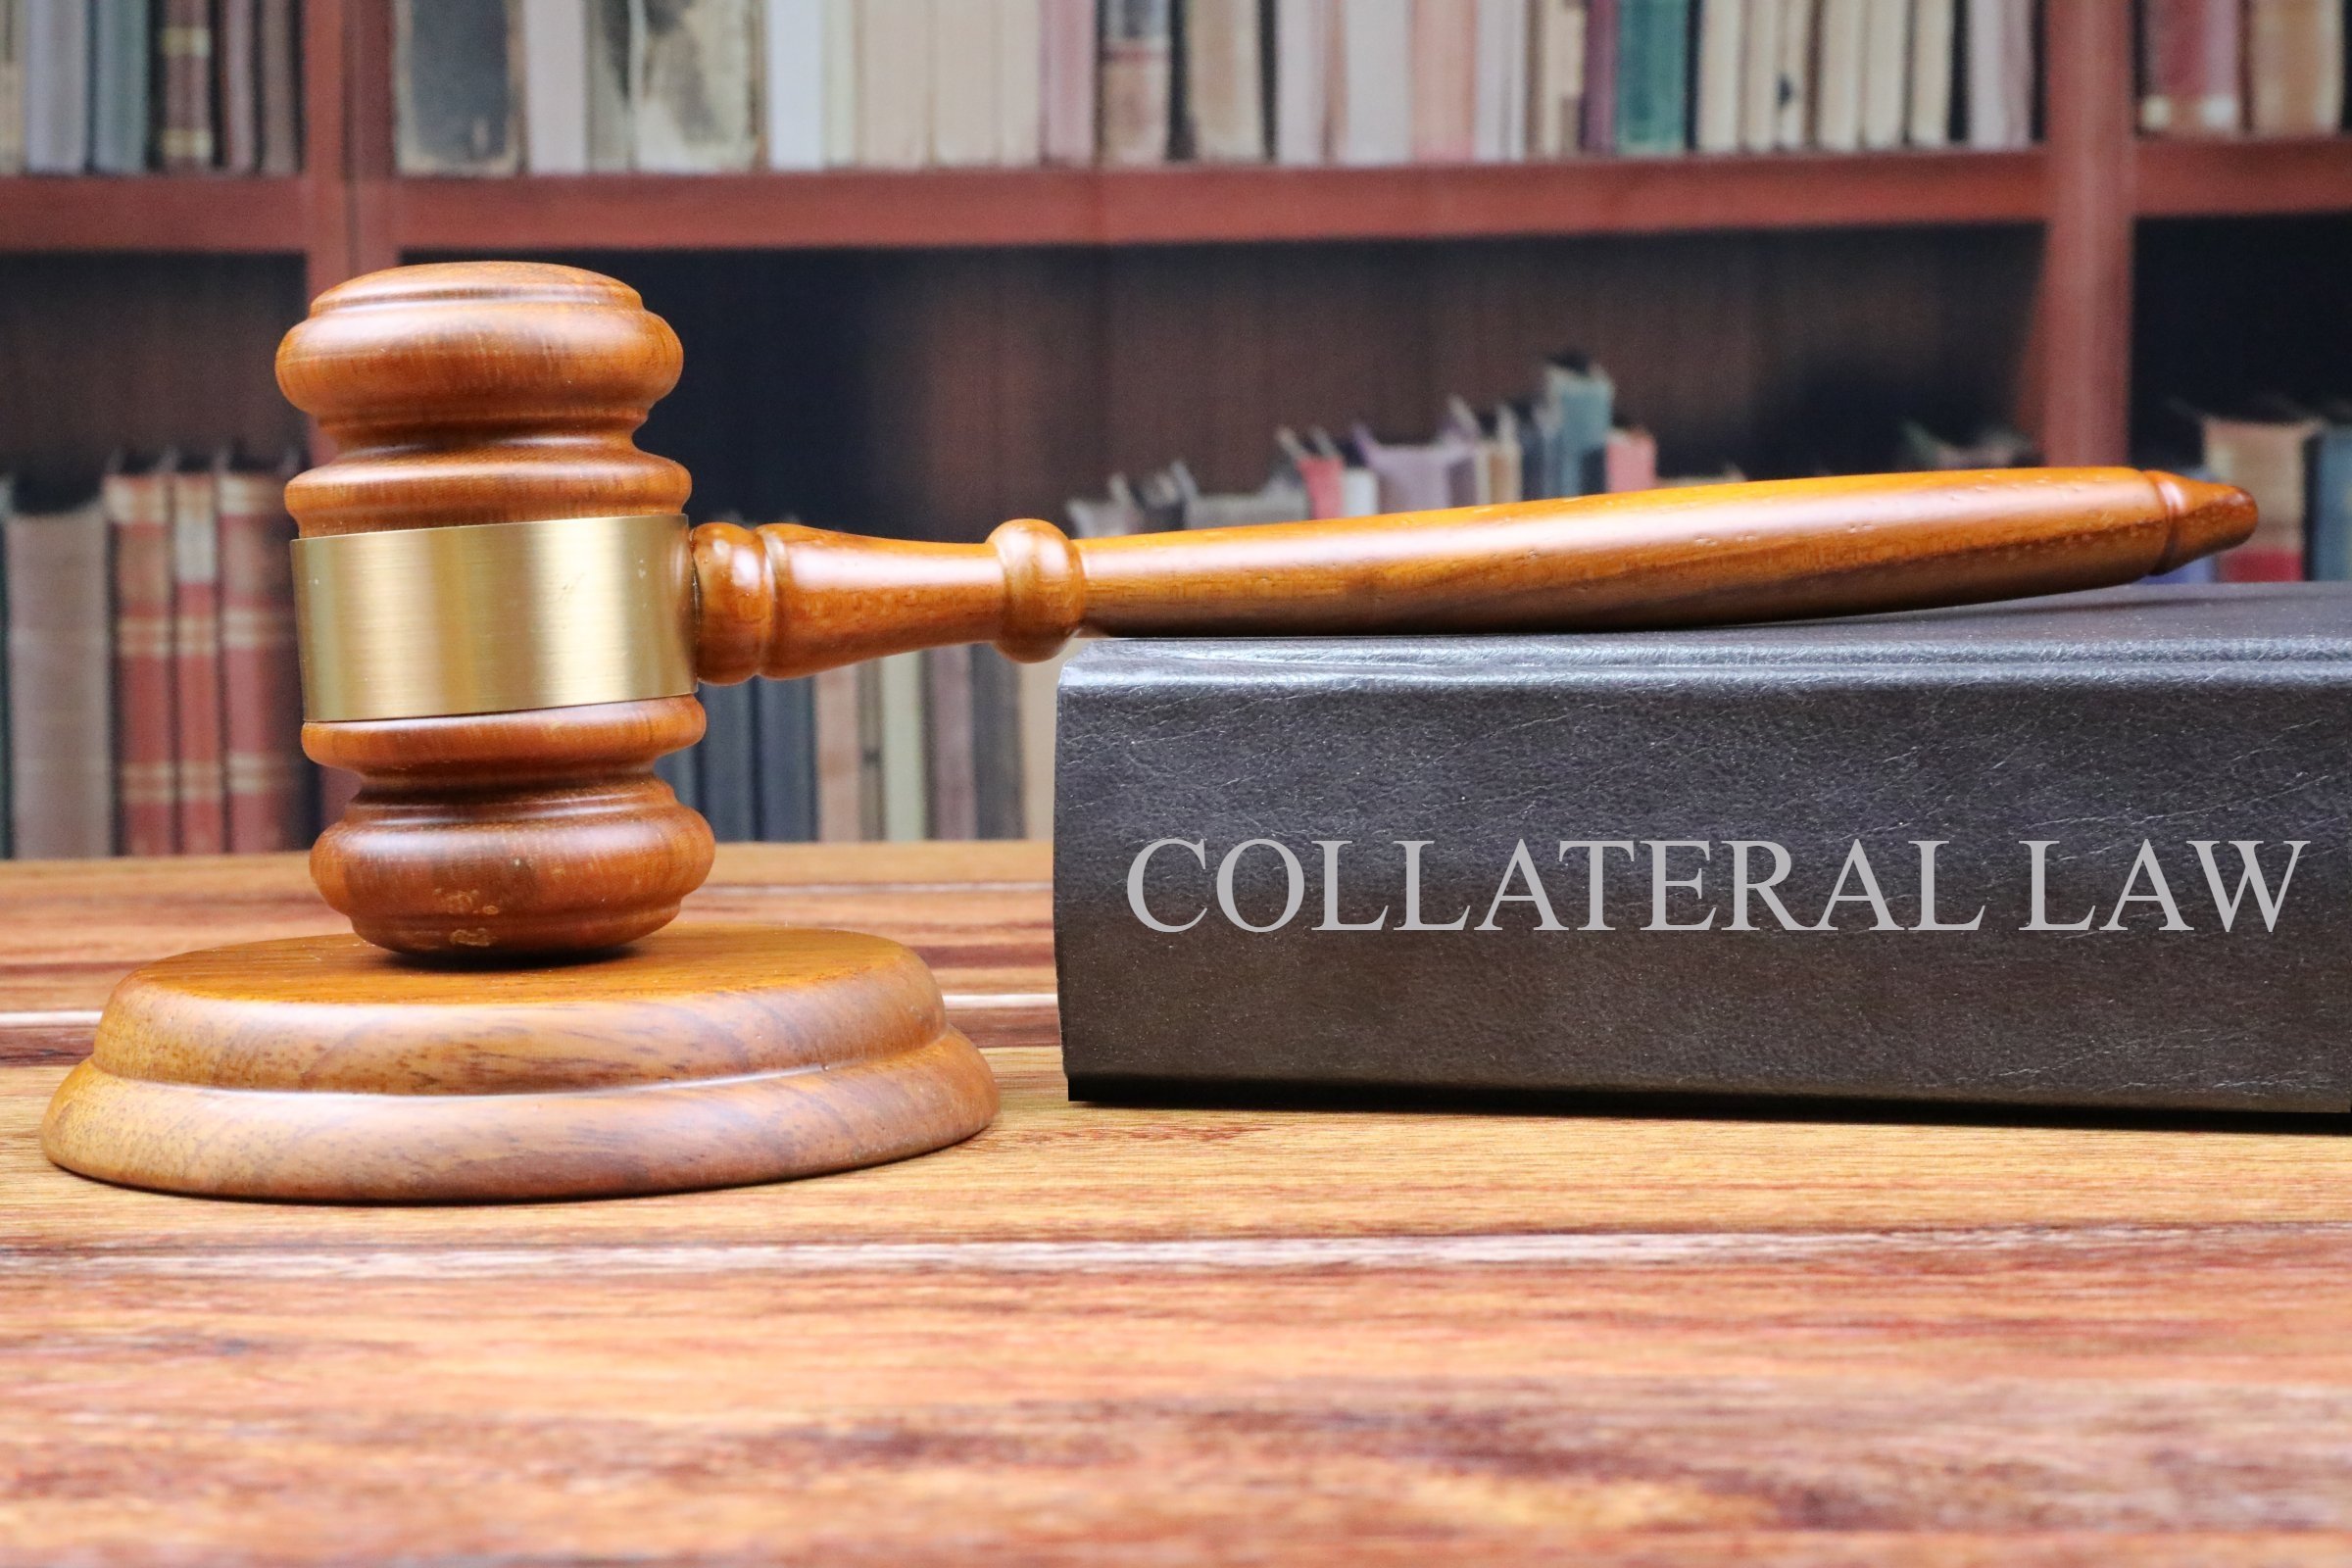 Collateral Law